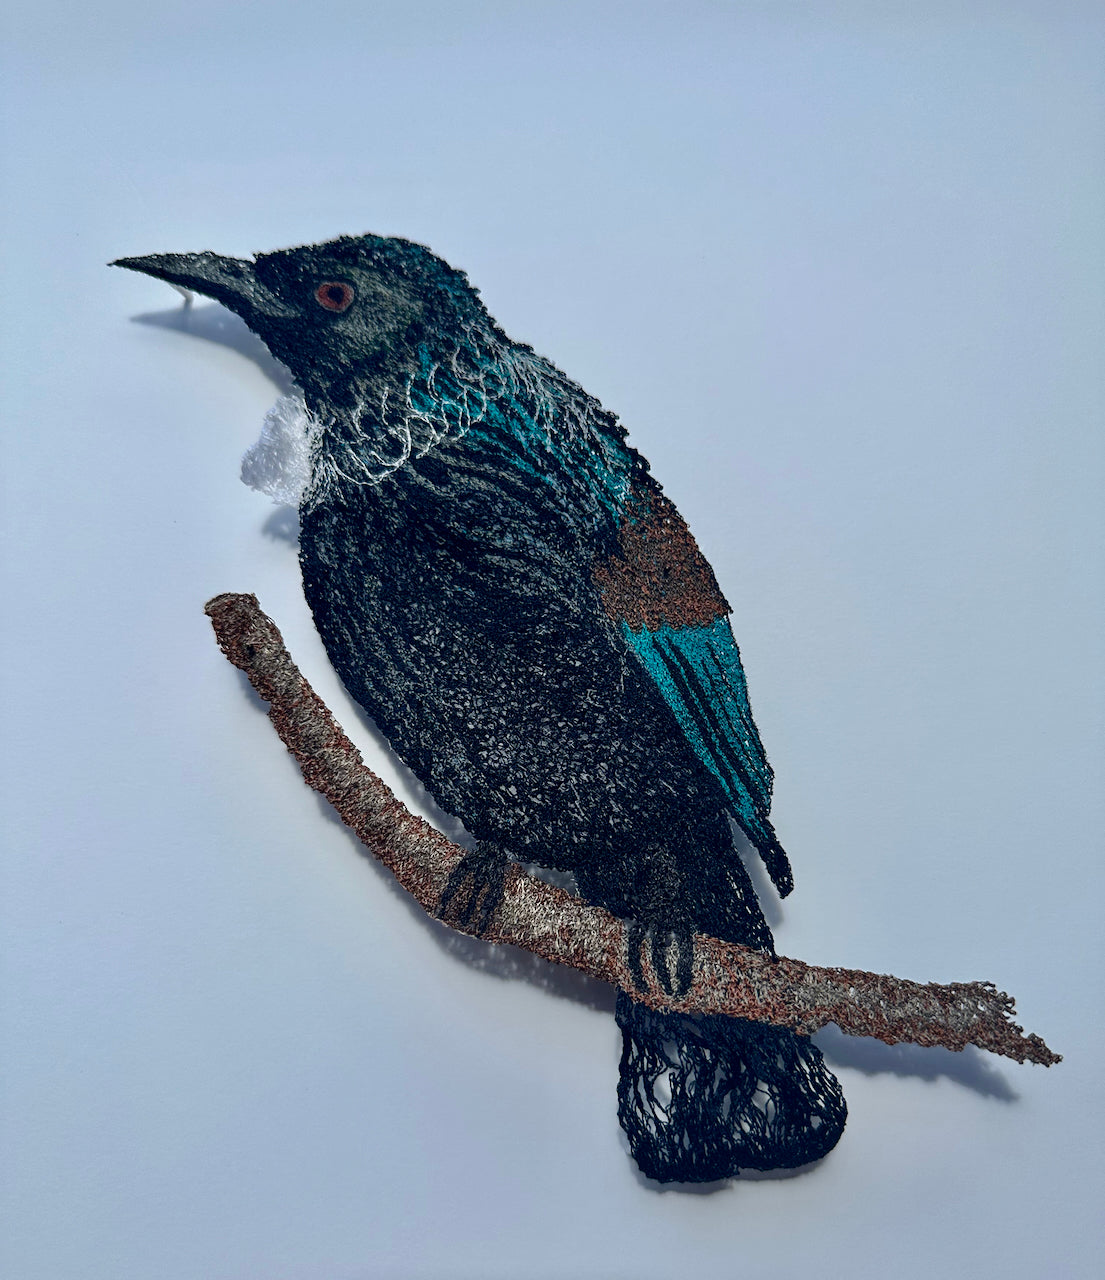 Tui sculptural embroidery.